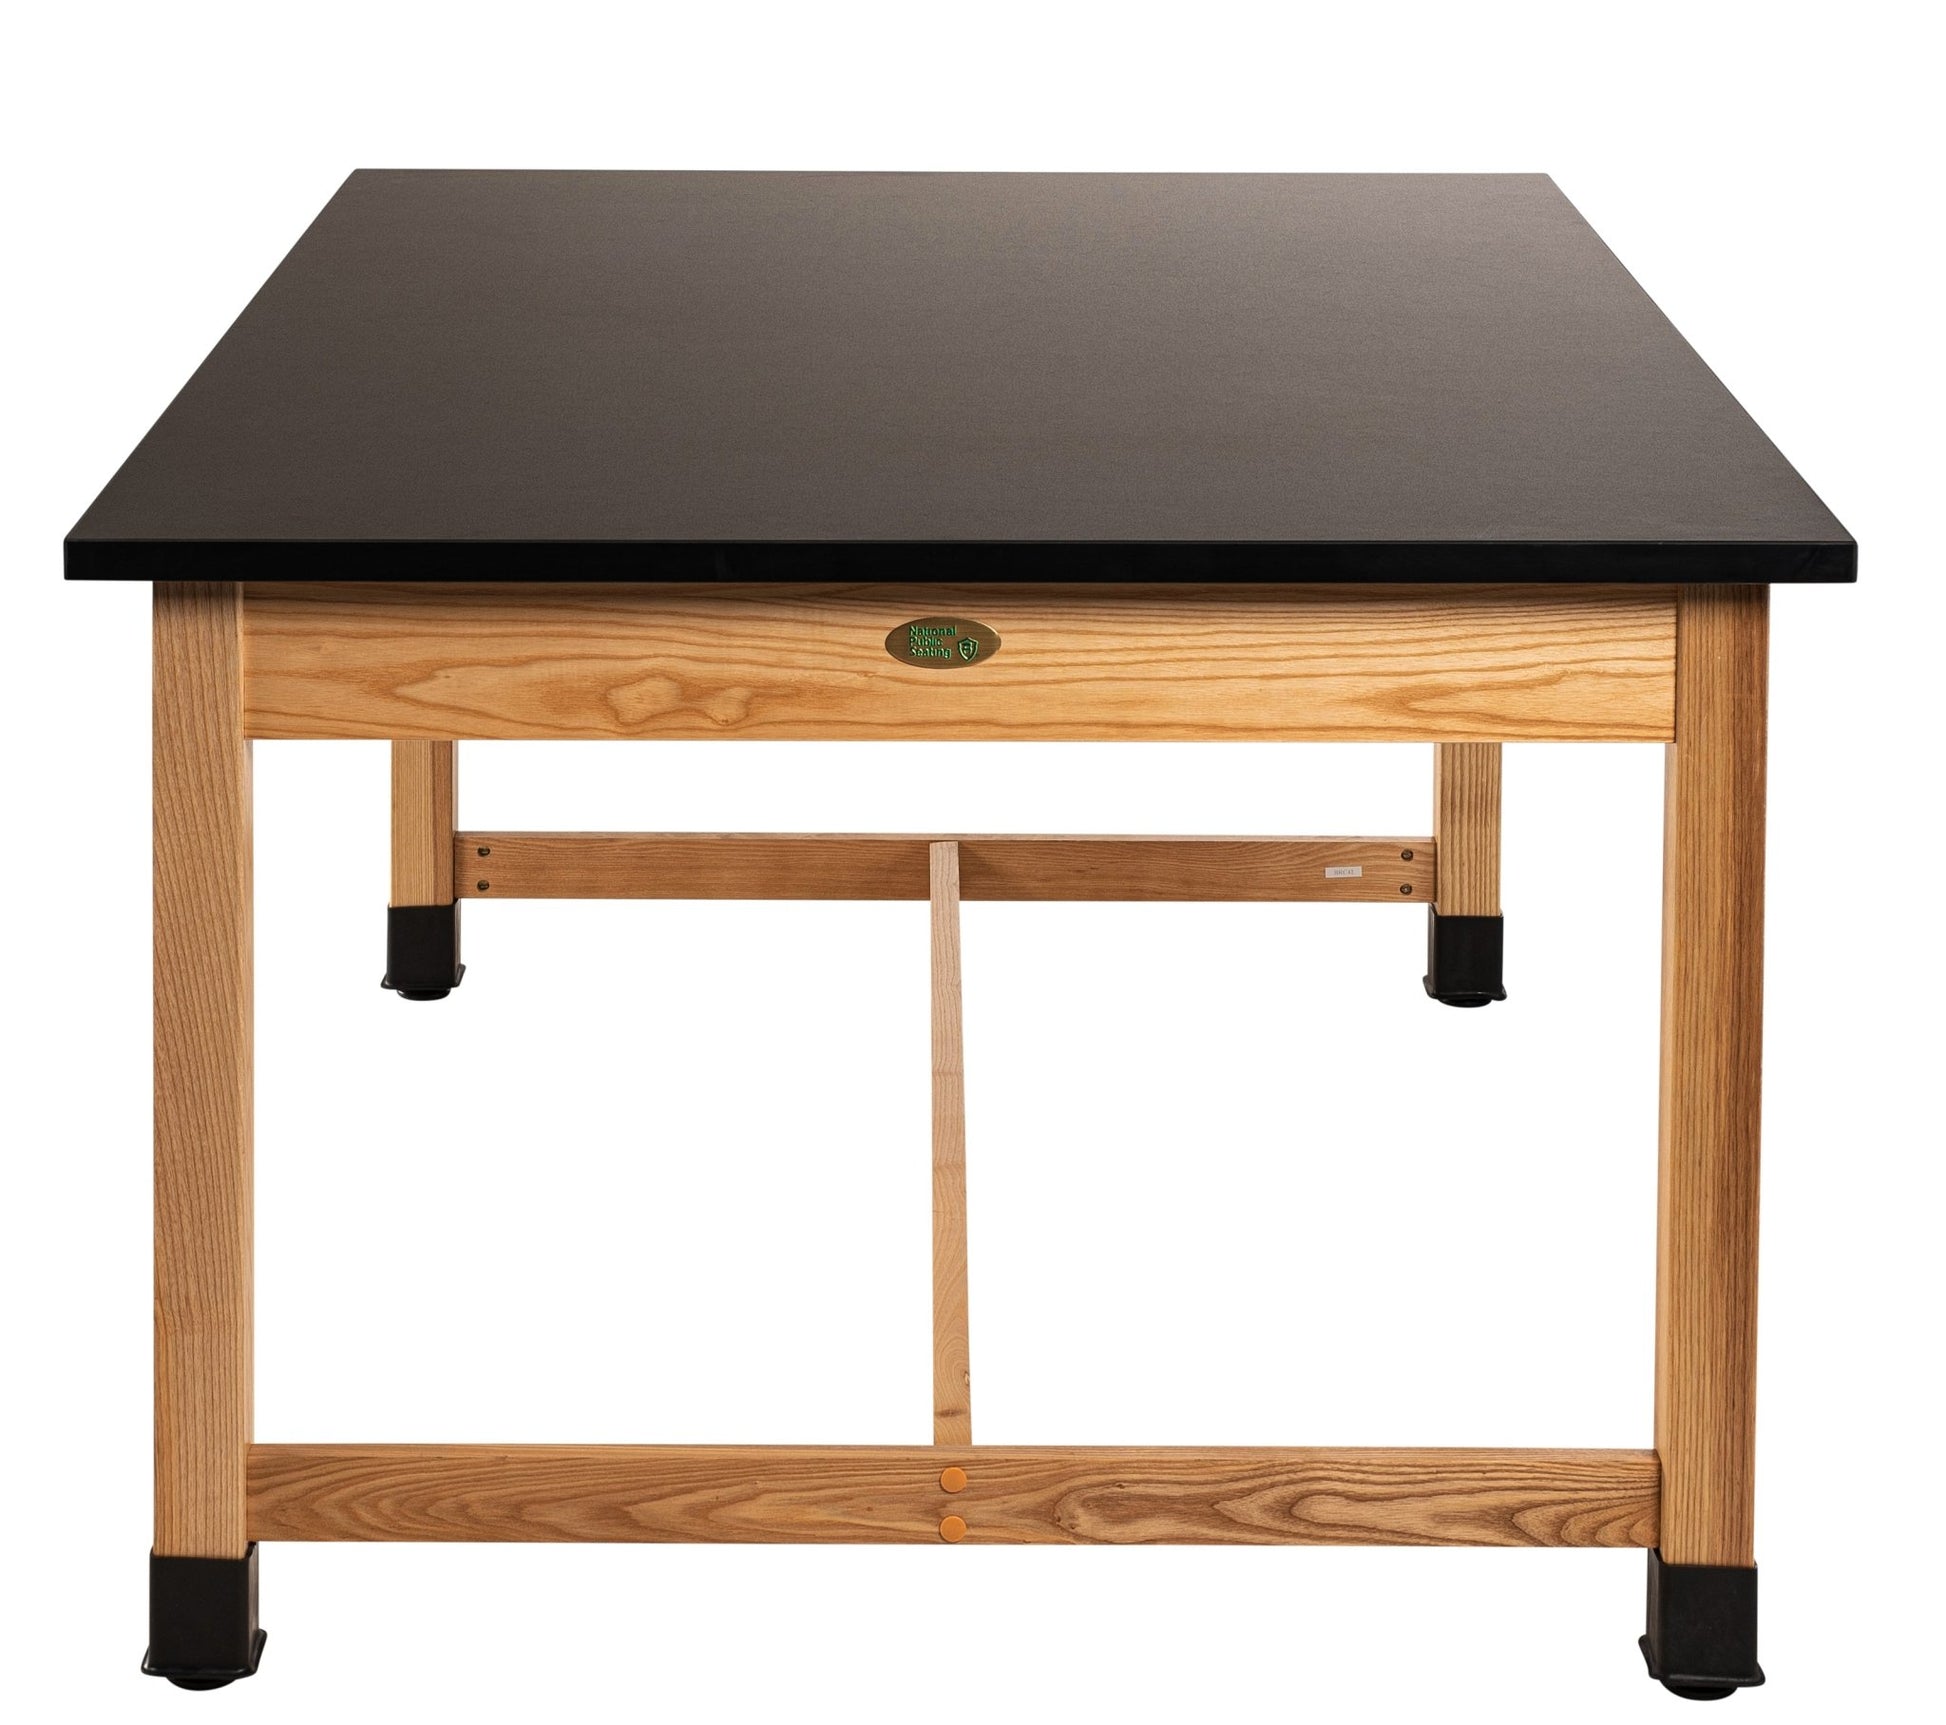 NPS Wood Science Lab Table, 42 x 60 x 36, Phenolic Top (National Public Seating NPS-SLT2-4260P) - SchoolOutlet